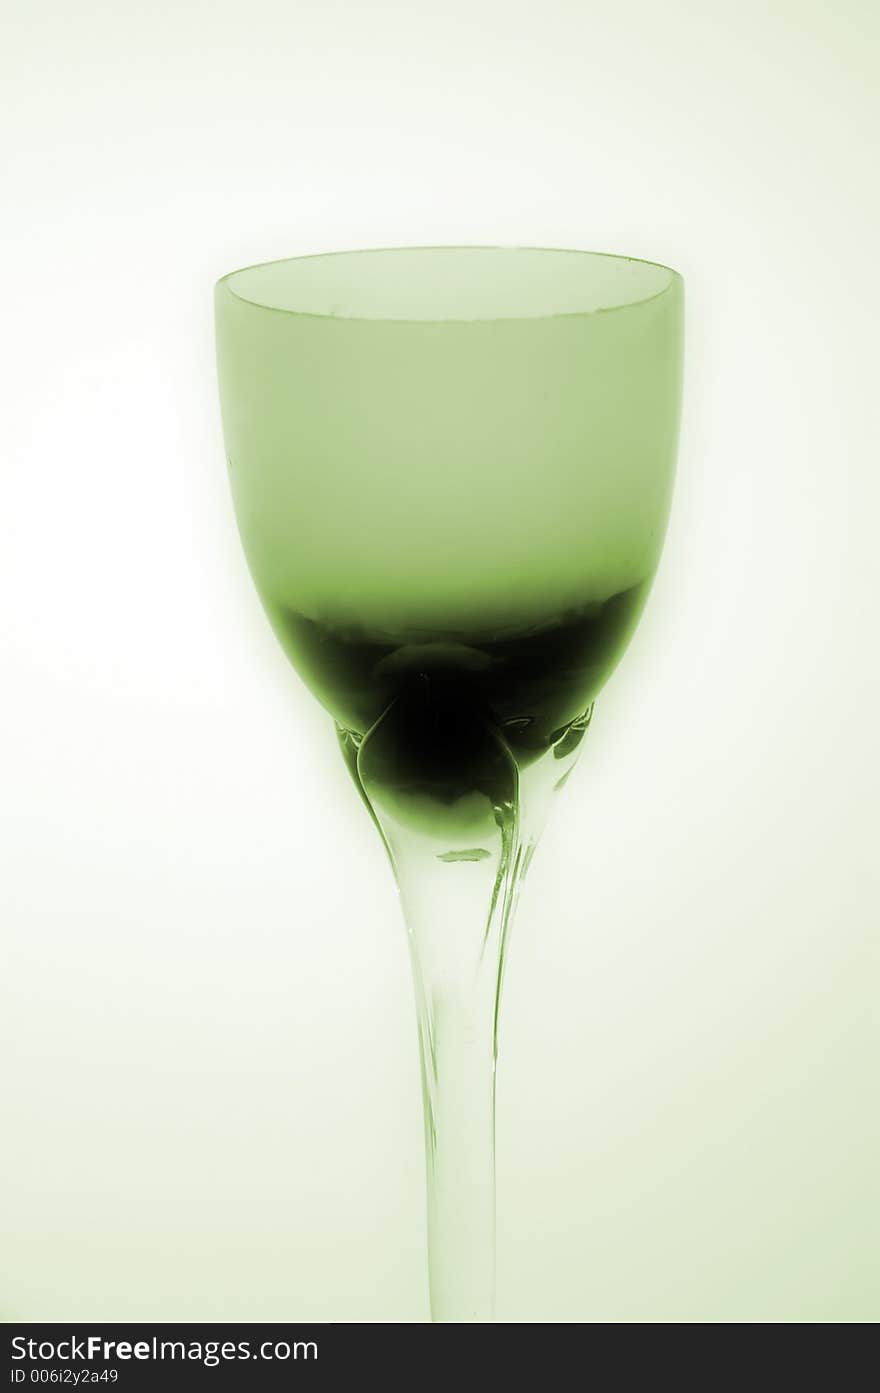 Green glass for wine. Picture taken with digital soft filter